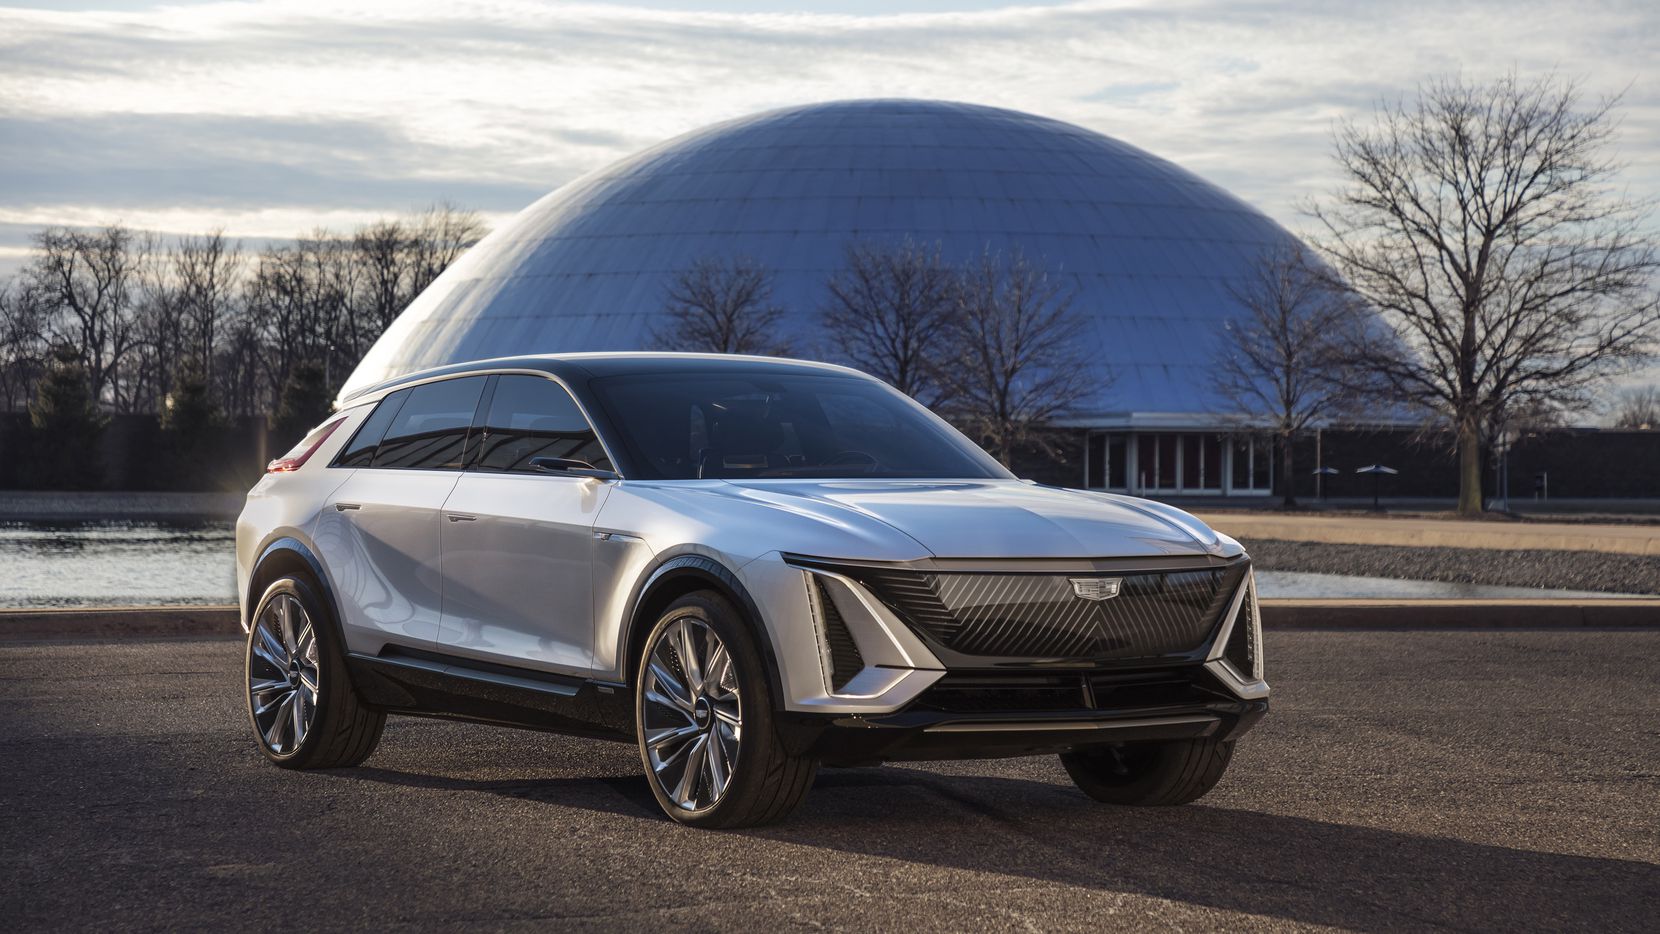 The Cadillac Lyriq pairs next-generation battery technology with a bold design statement...